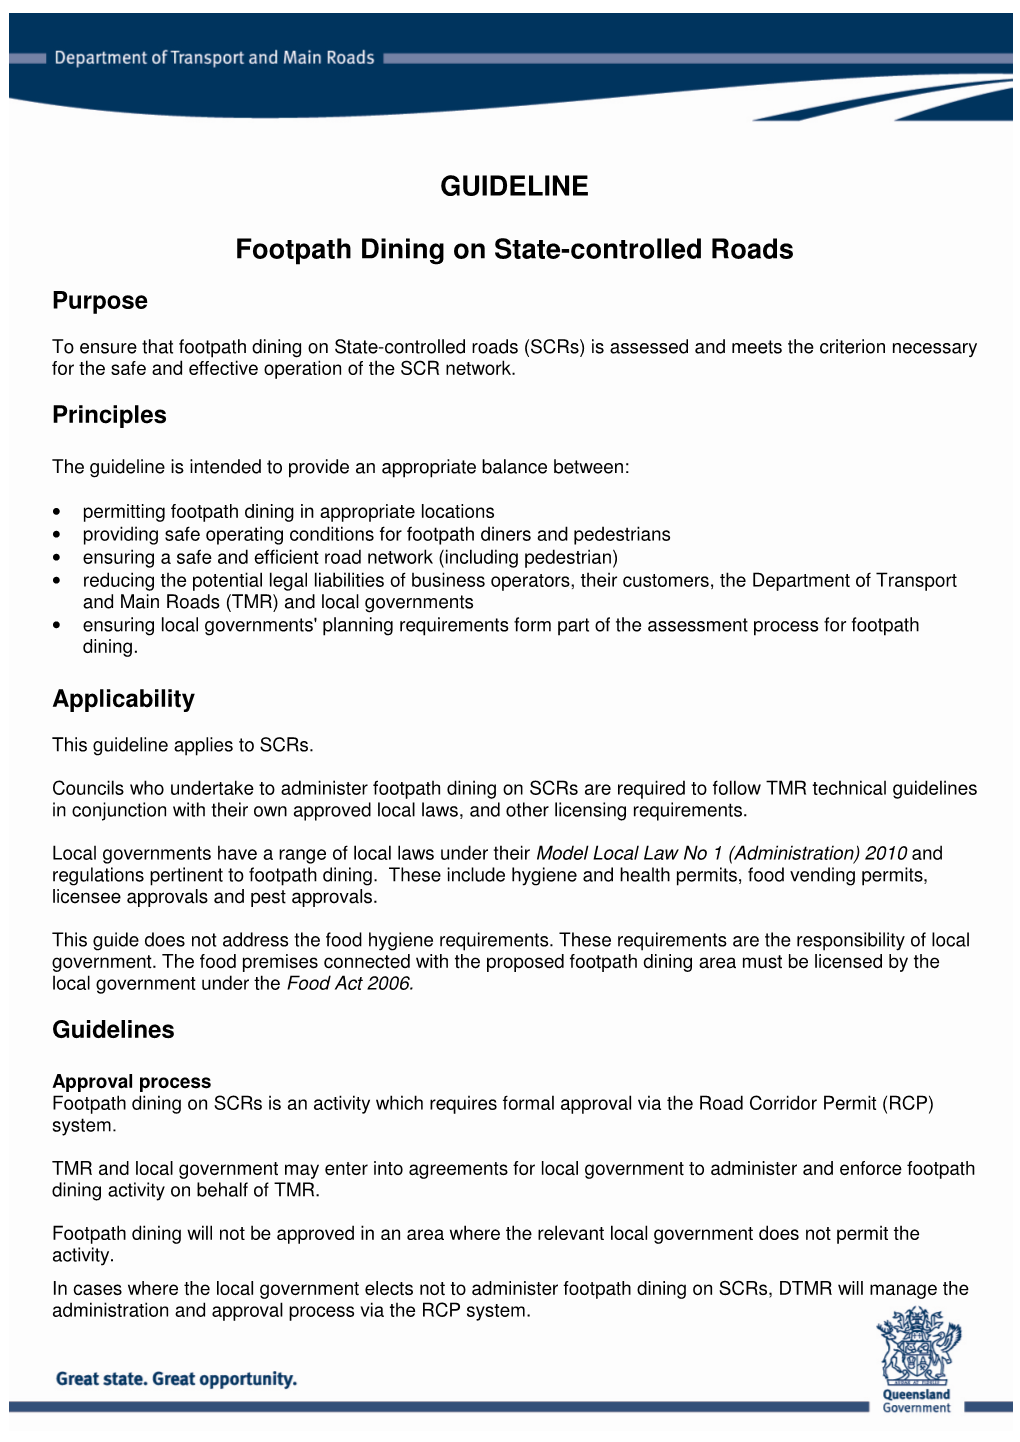 GUIDELINE Footpath Dining on State-Controlled Roads